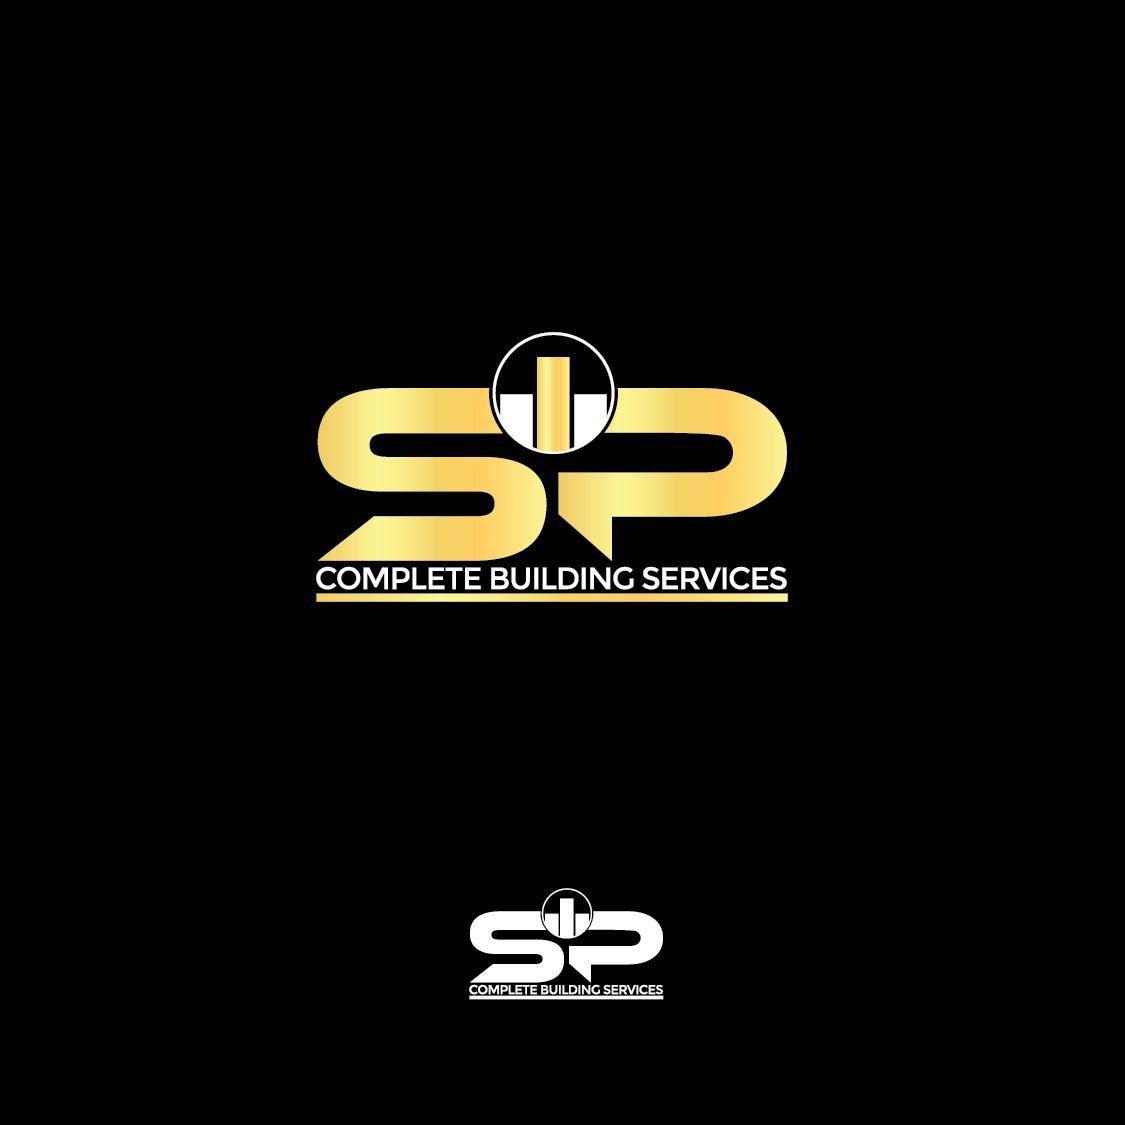 Sp Logo - It Company Logo Design for S.P Complete Building Services by ...